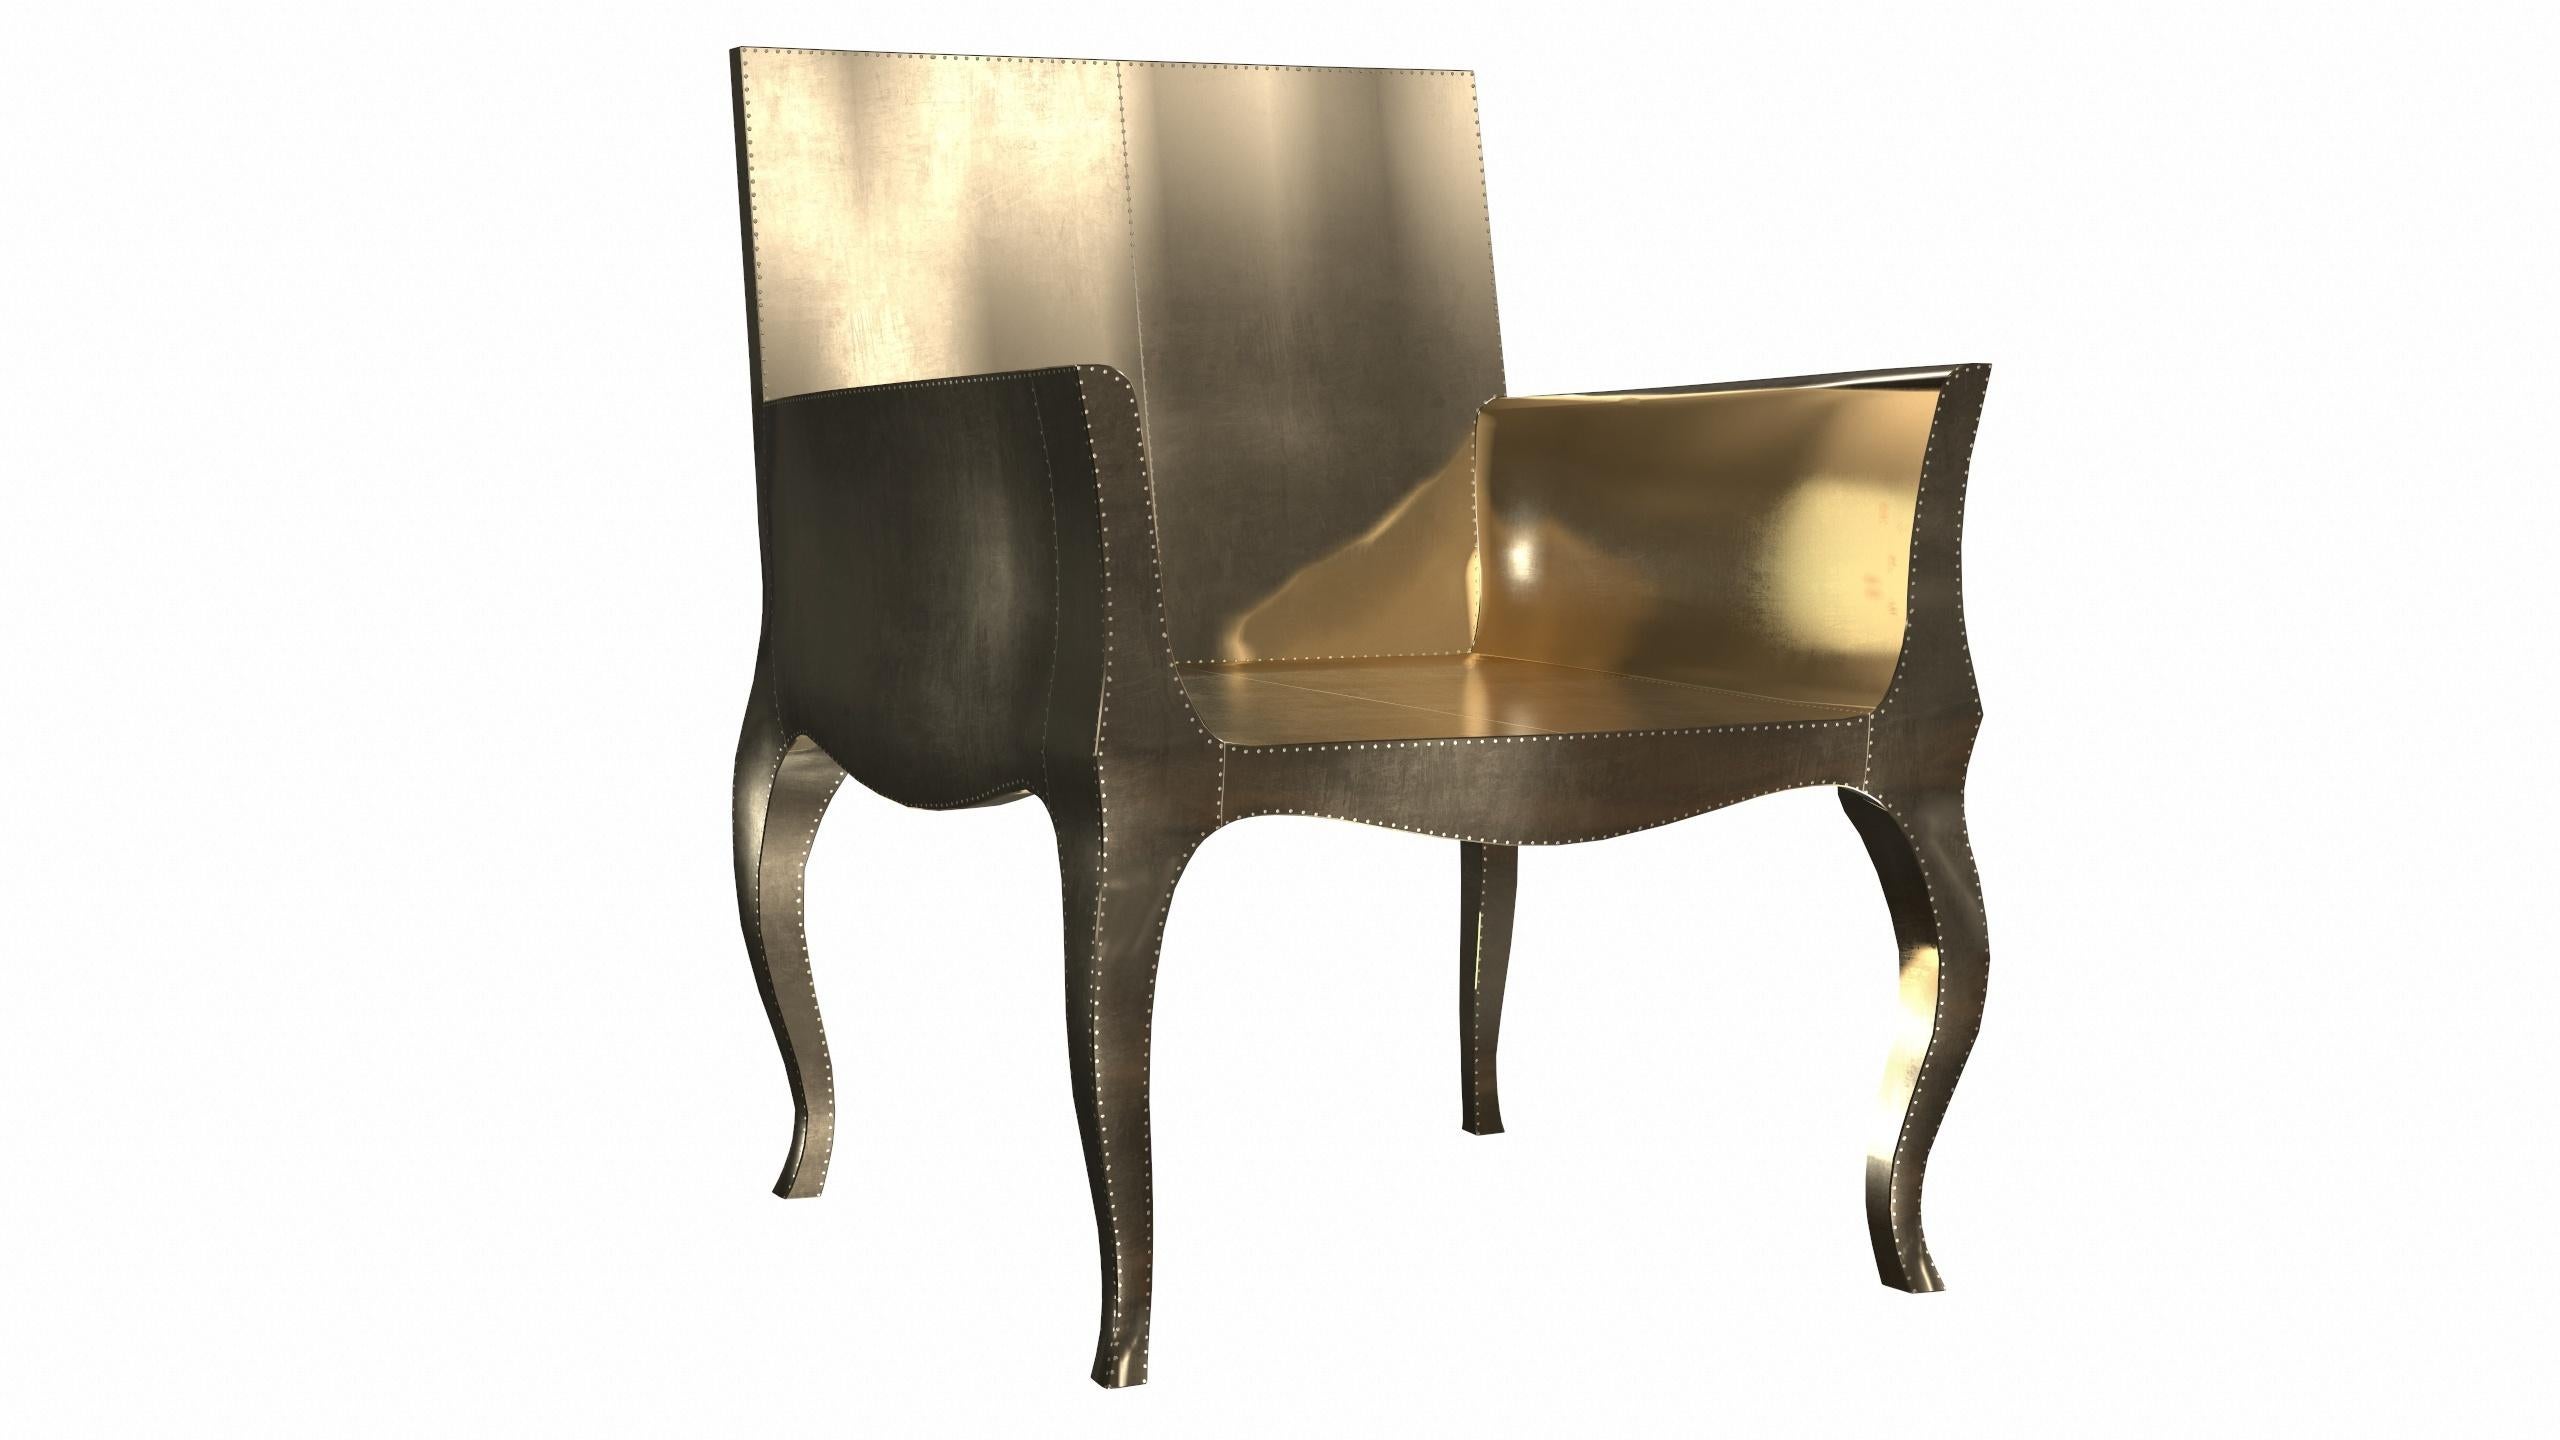 Art Deco Desk Chair in Smooth Brass by Paul Mathieu for S. Odegard In New Condition For Sale In New York, NY